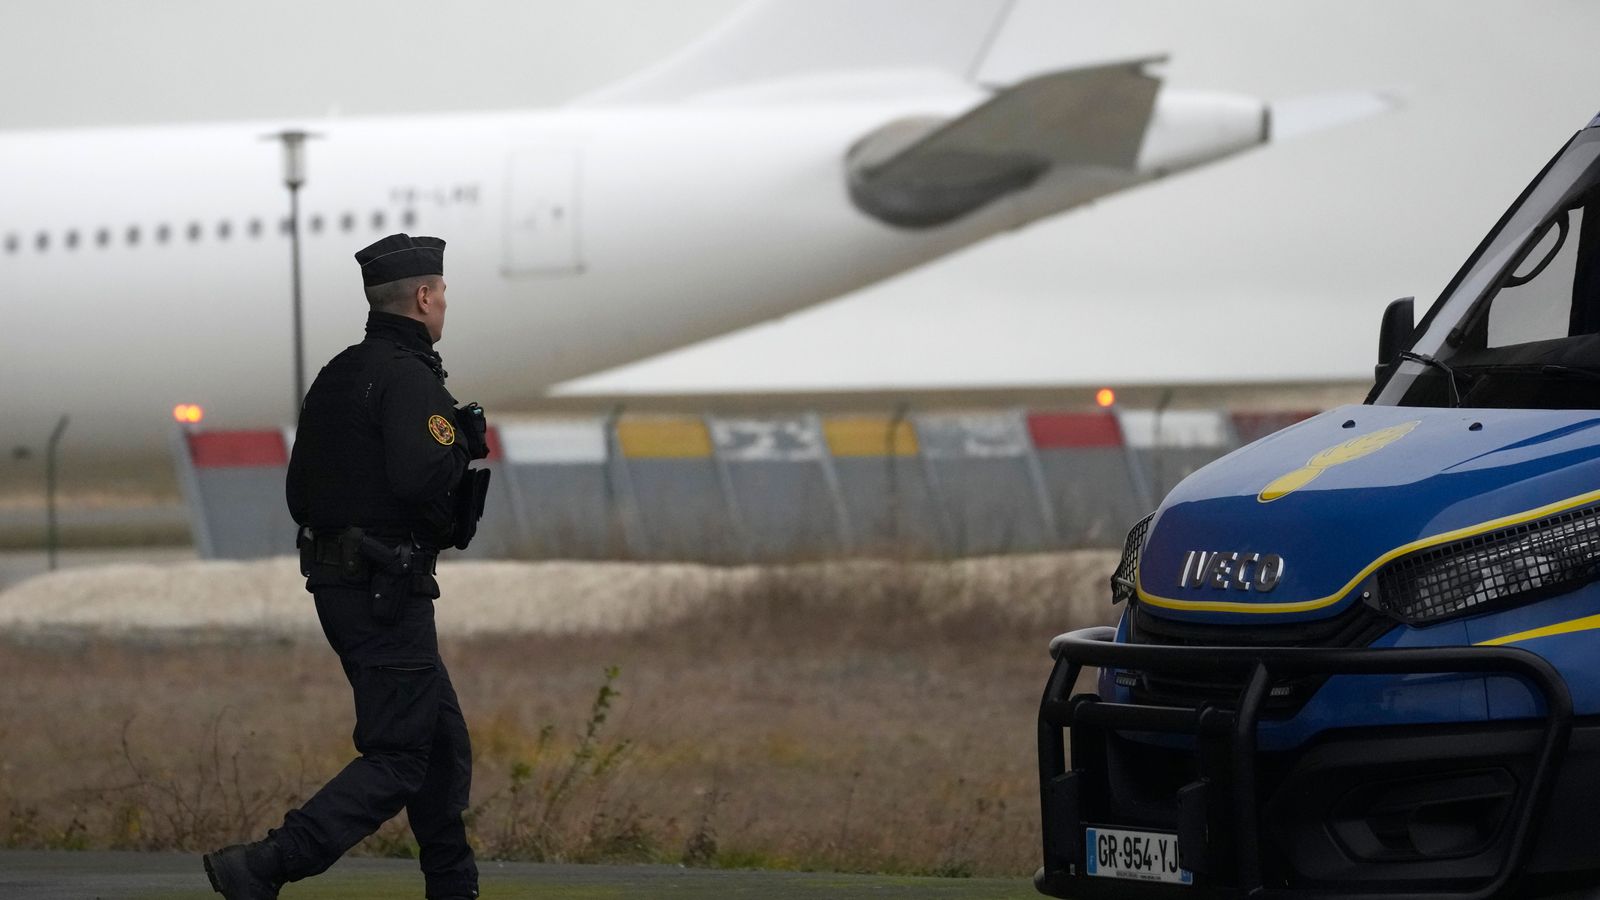 Plane with 303 Indian passengers grounded in France over human trafficking suspicions